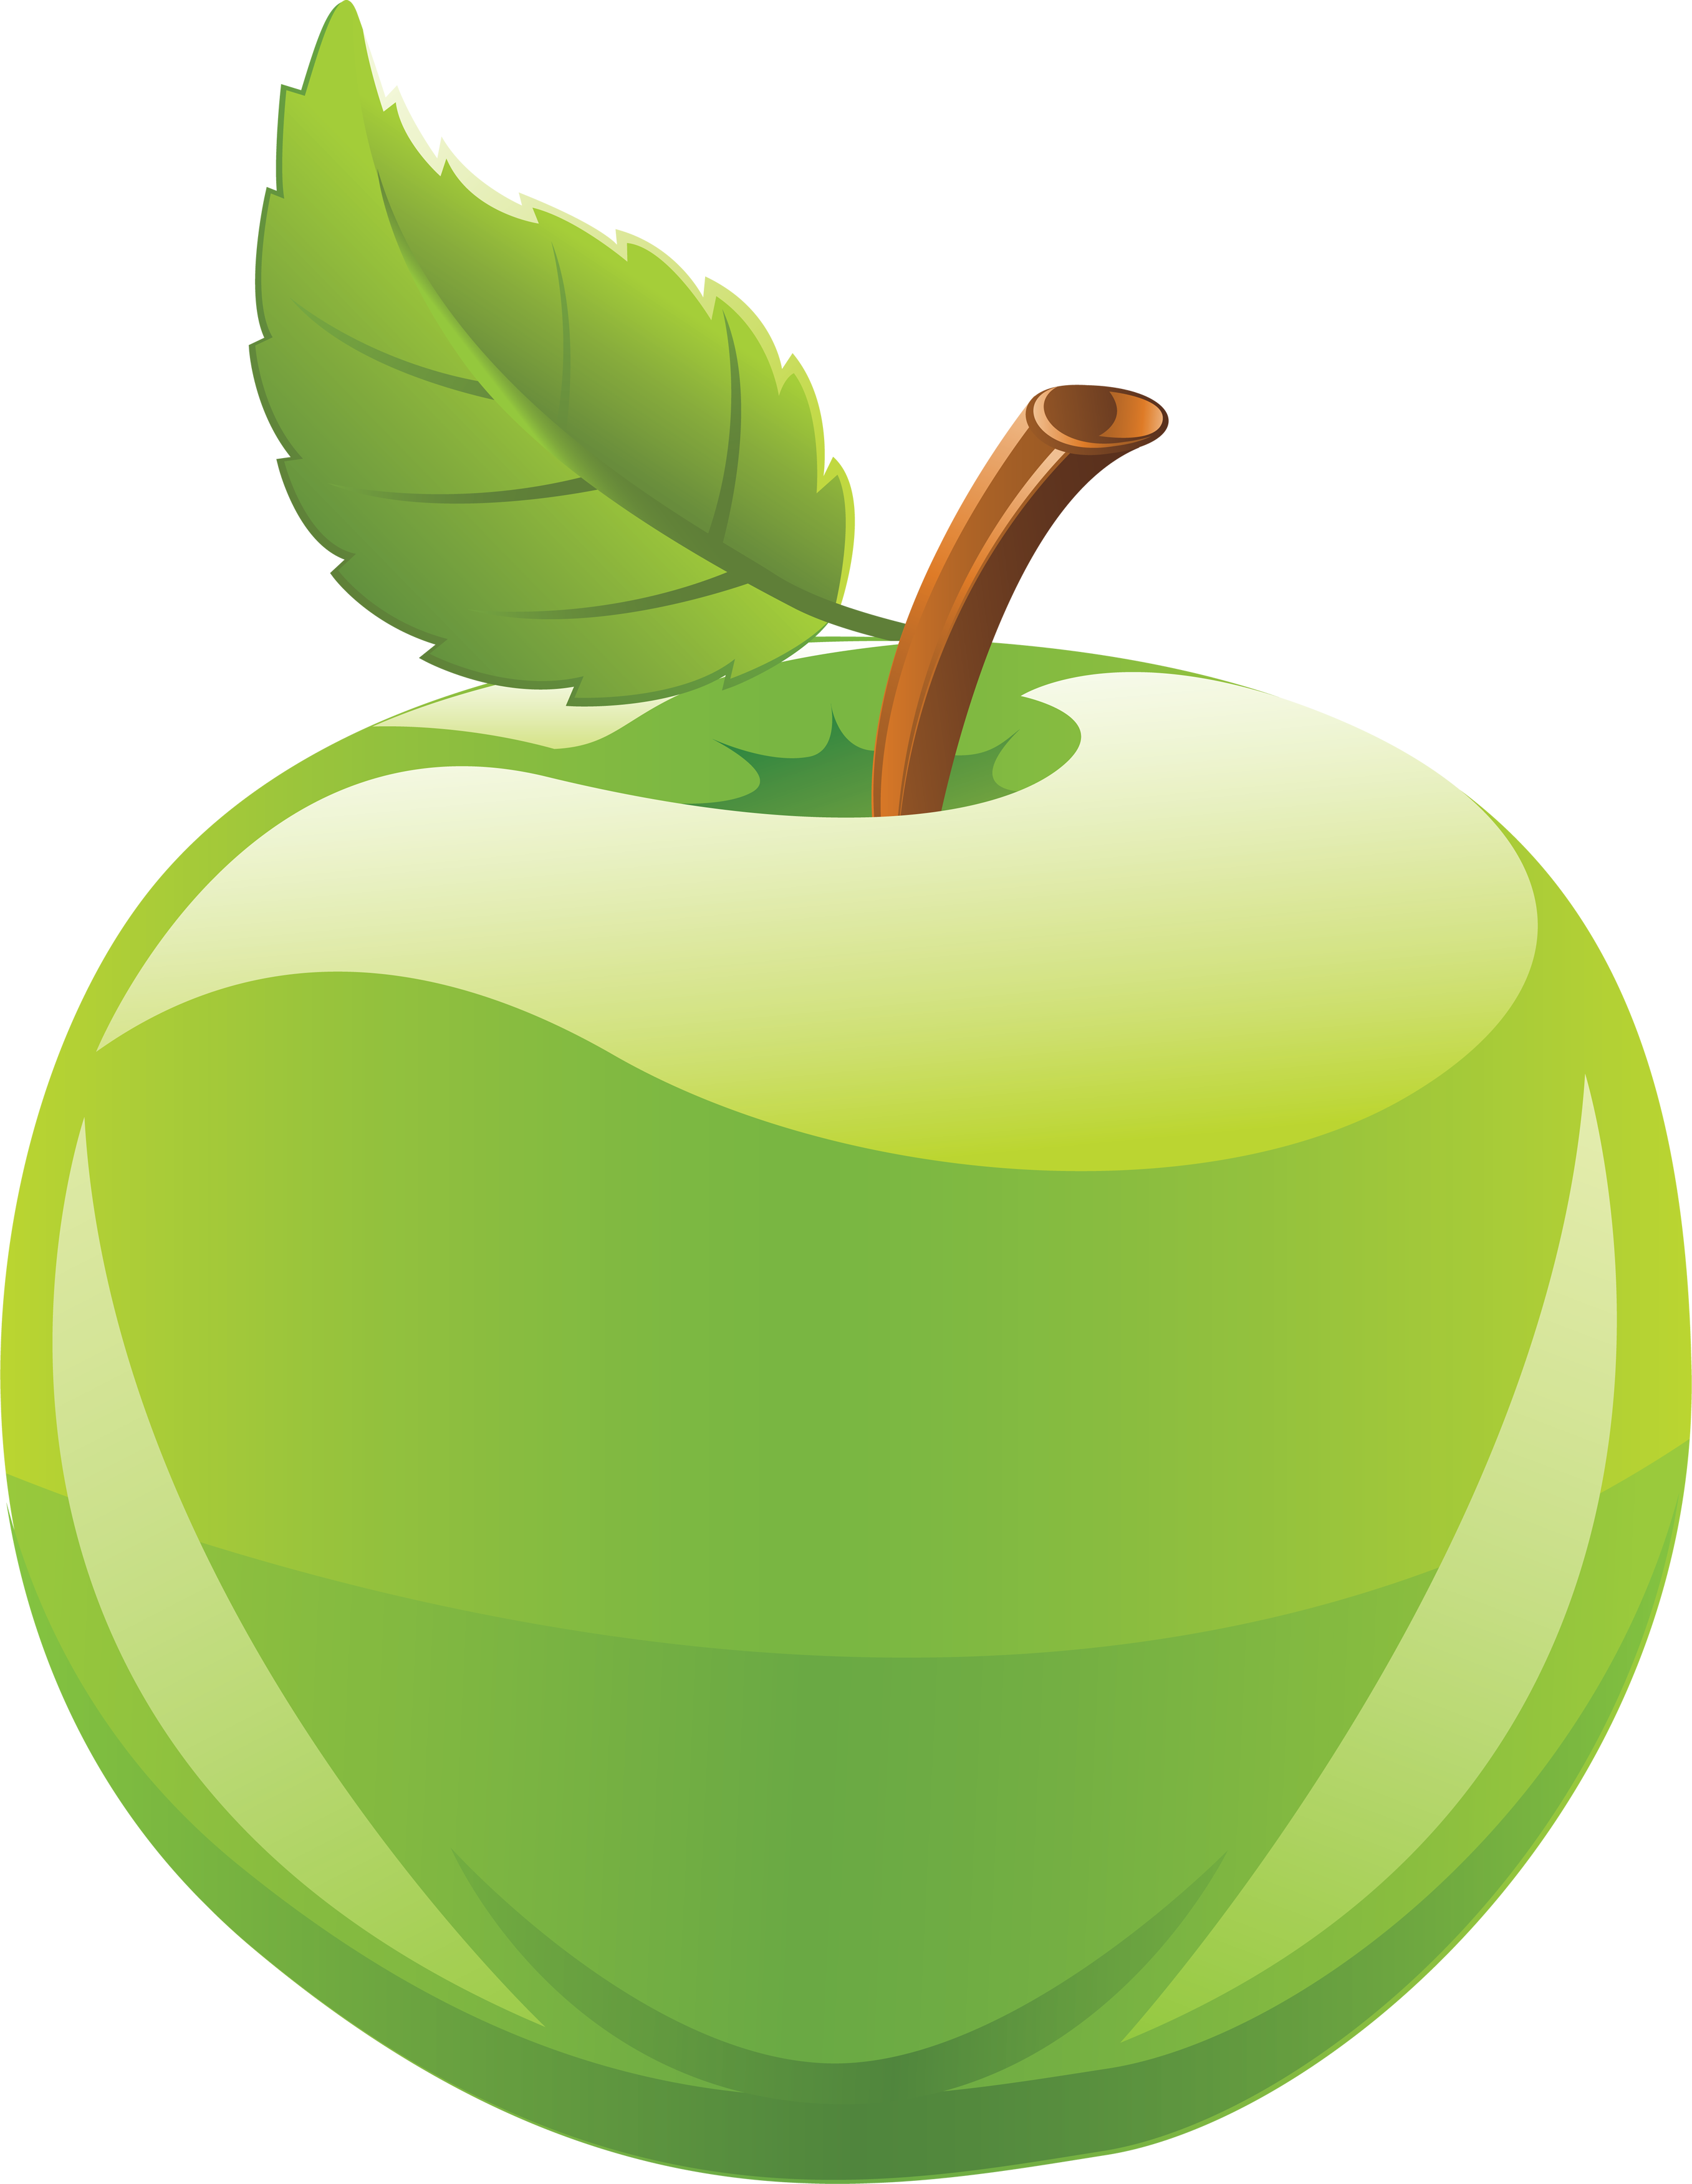 green apple clipart free - photo #20